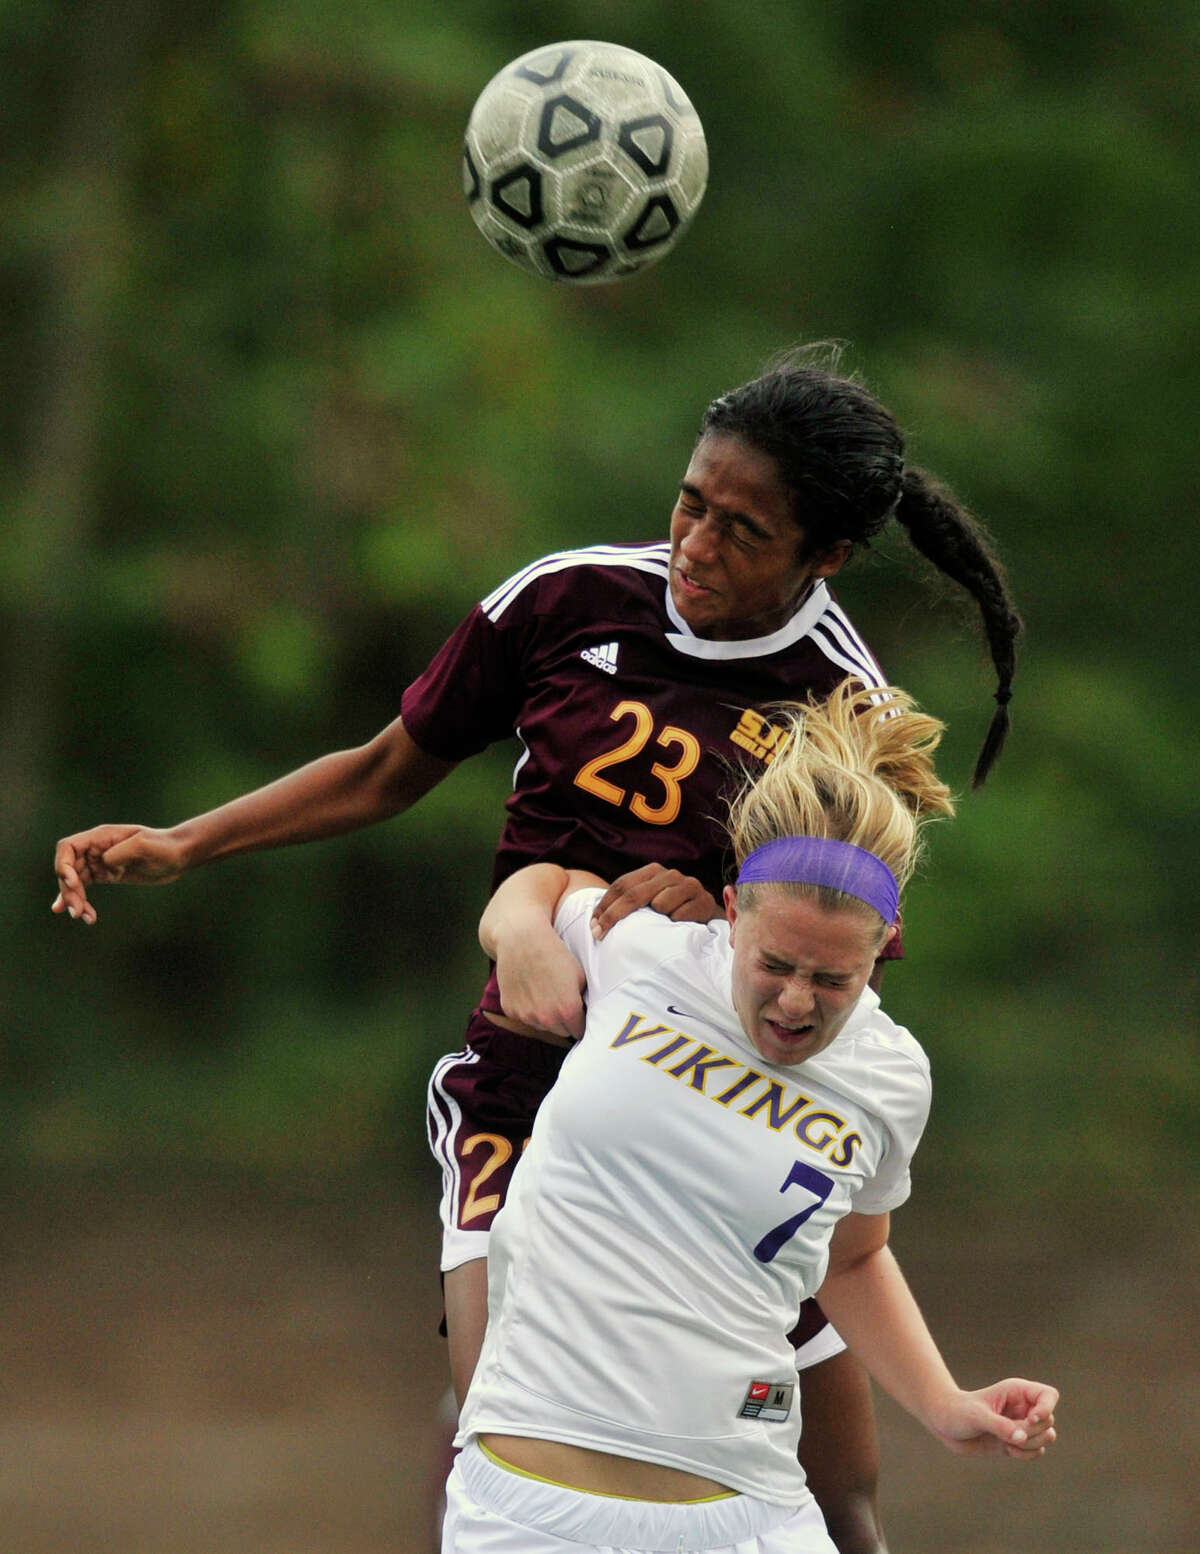 St. Joseph's Leah Lewis leaps over Westhill's Rachel Benz to get a head on the ball during their game at Westhill High School in Stamford, Conn., on Wednesday, Oct. 16, 2013. St. Joseph won, 4-1.